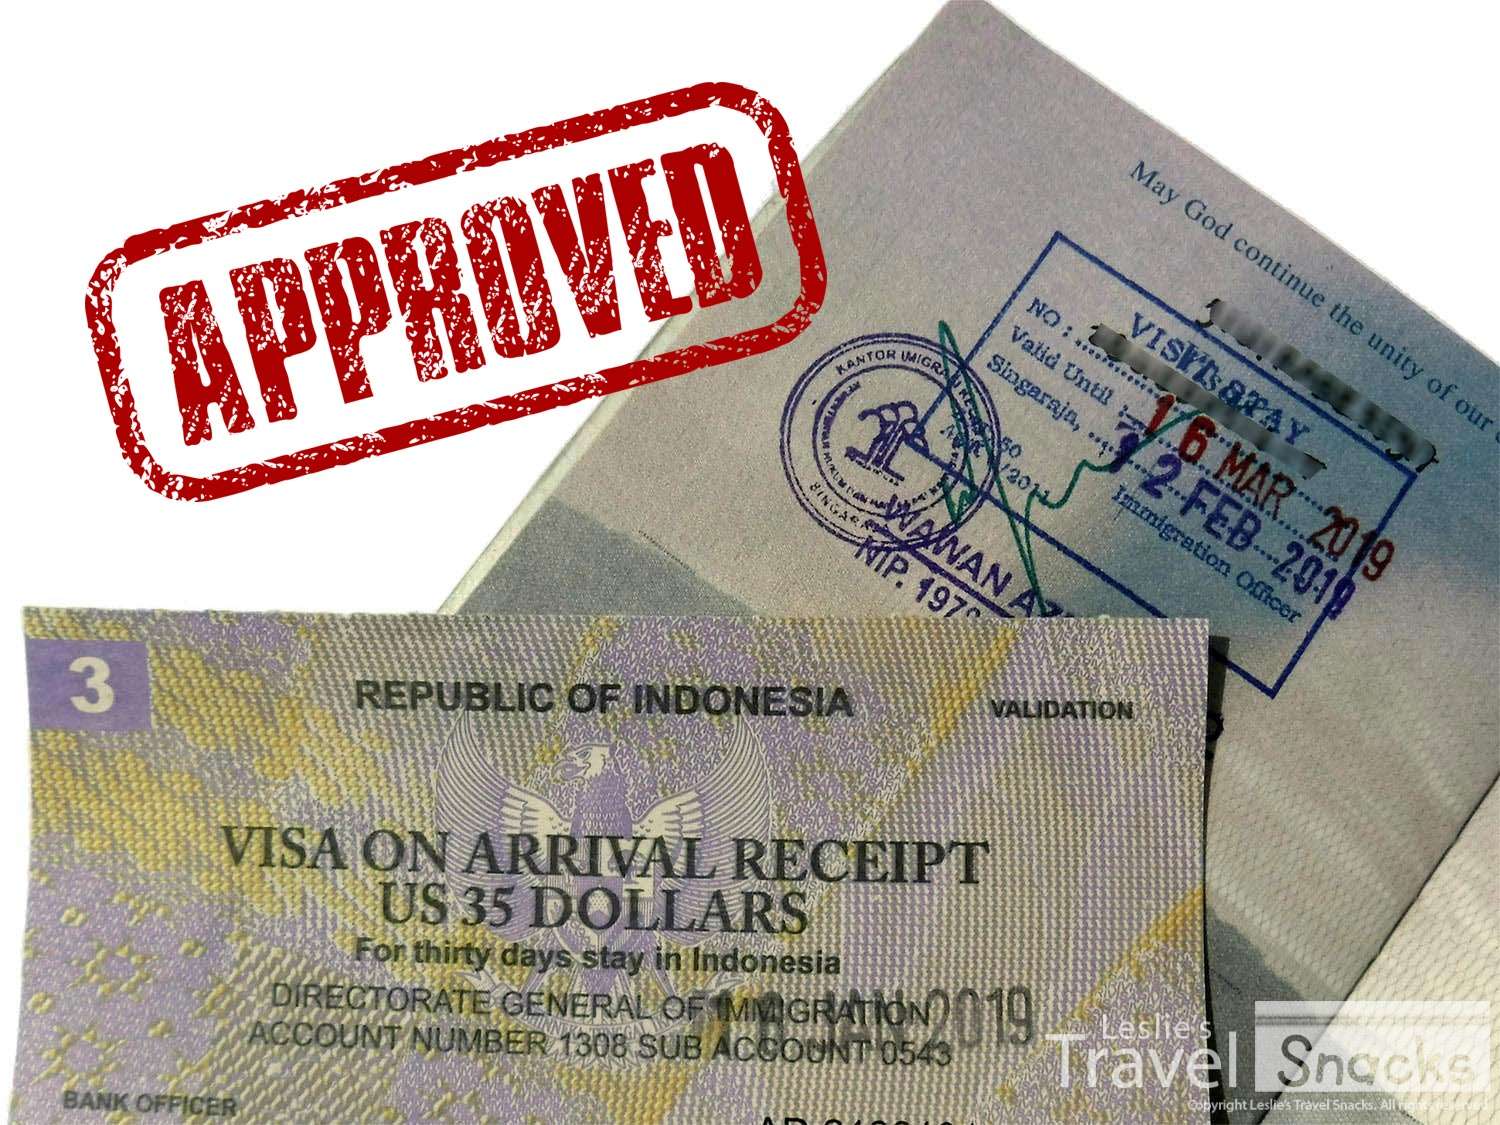 For a 60-day visa, first pay for the special 30-day visa at the airport.